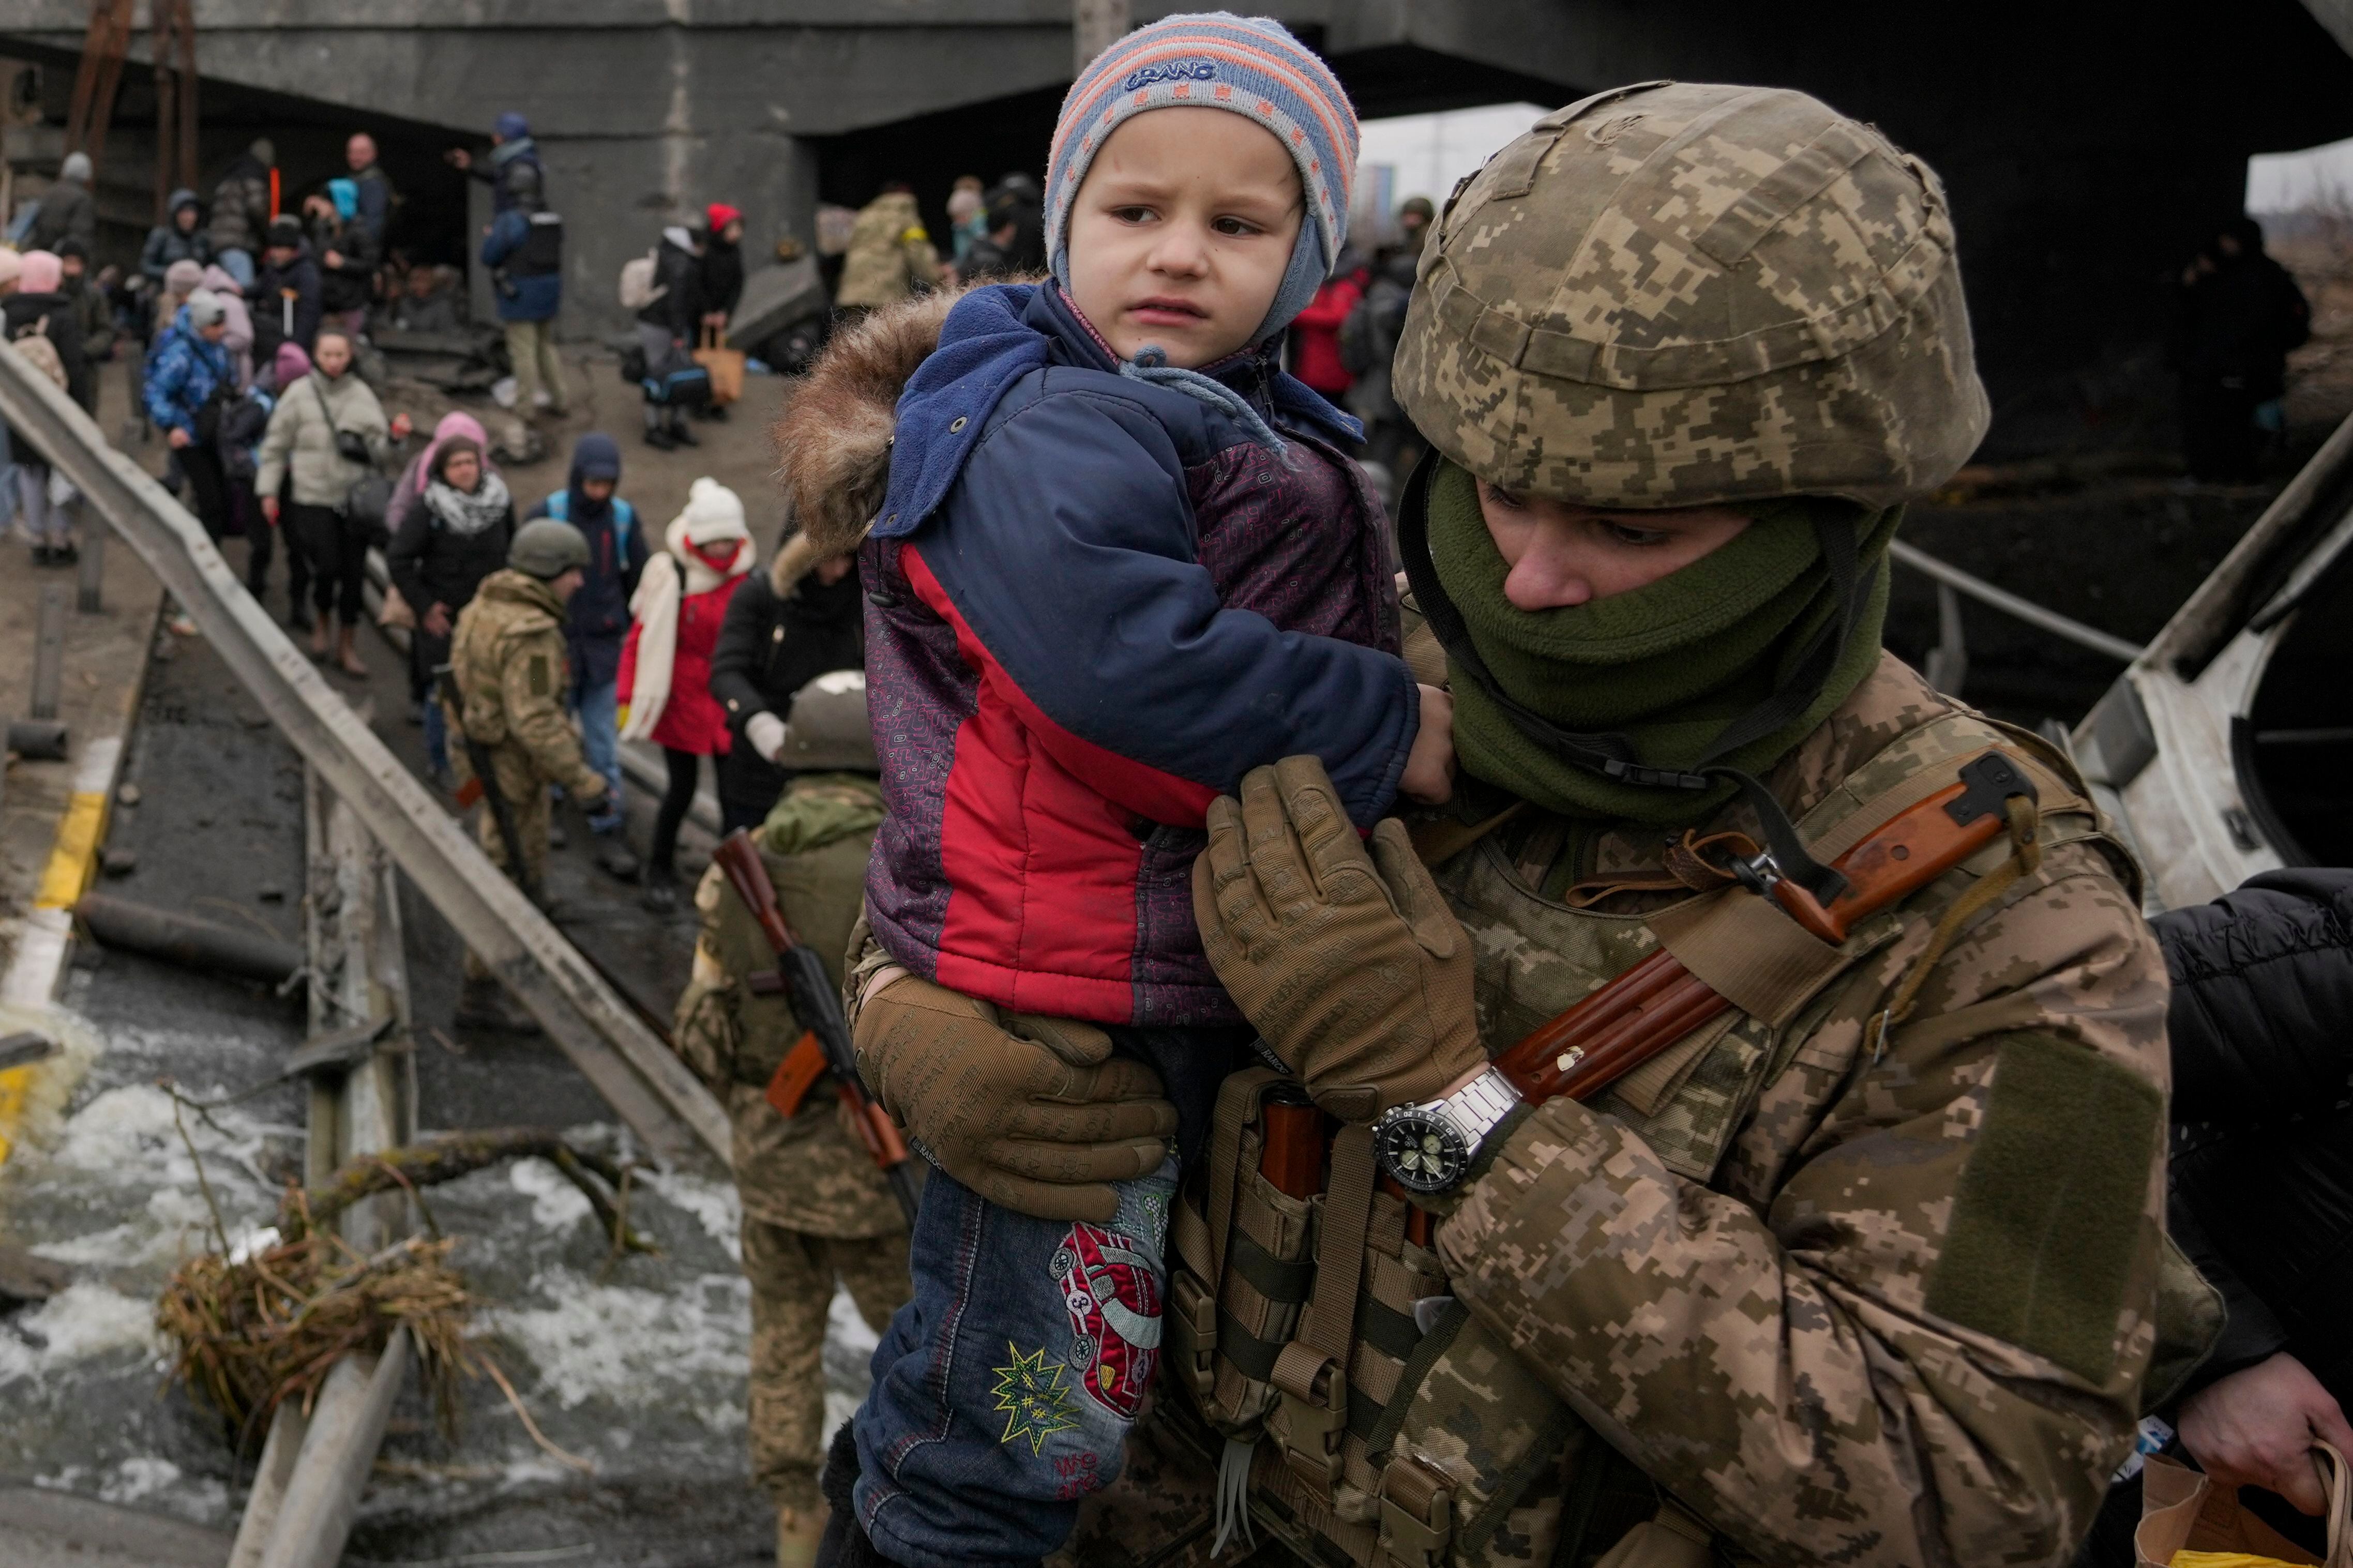 A Ukrainian serviceman holds a baby crossing the Irpin river on an improvised path under a bridge that was destroyed by a Russian airstrike, while assisting people fleeing the town of Irpin, Ukraine, Saturday, March 5, 2022. (Vadim Ghirda/AP)